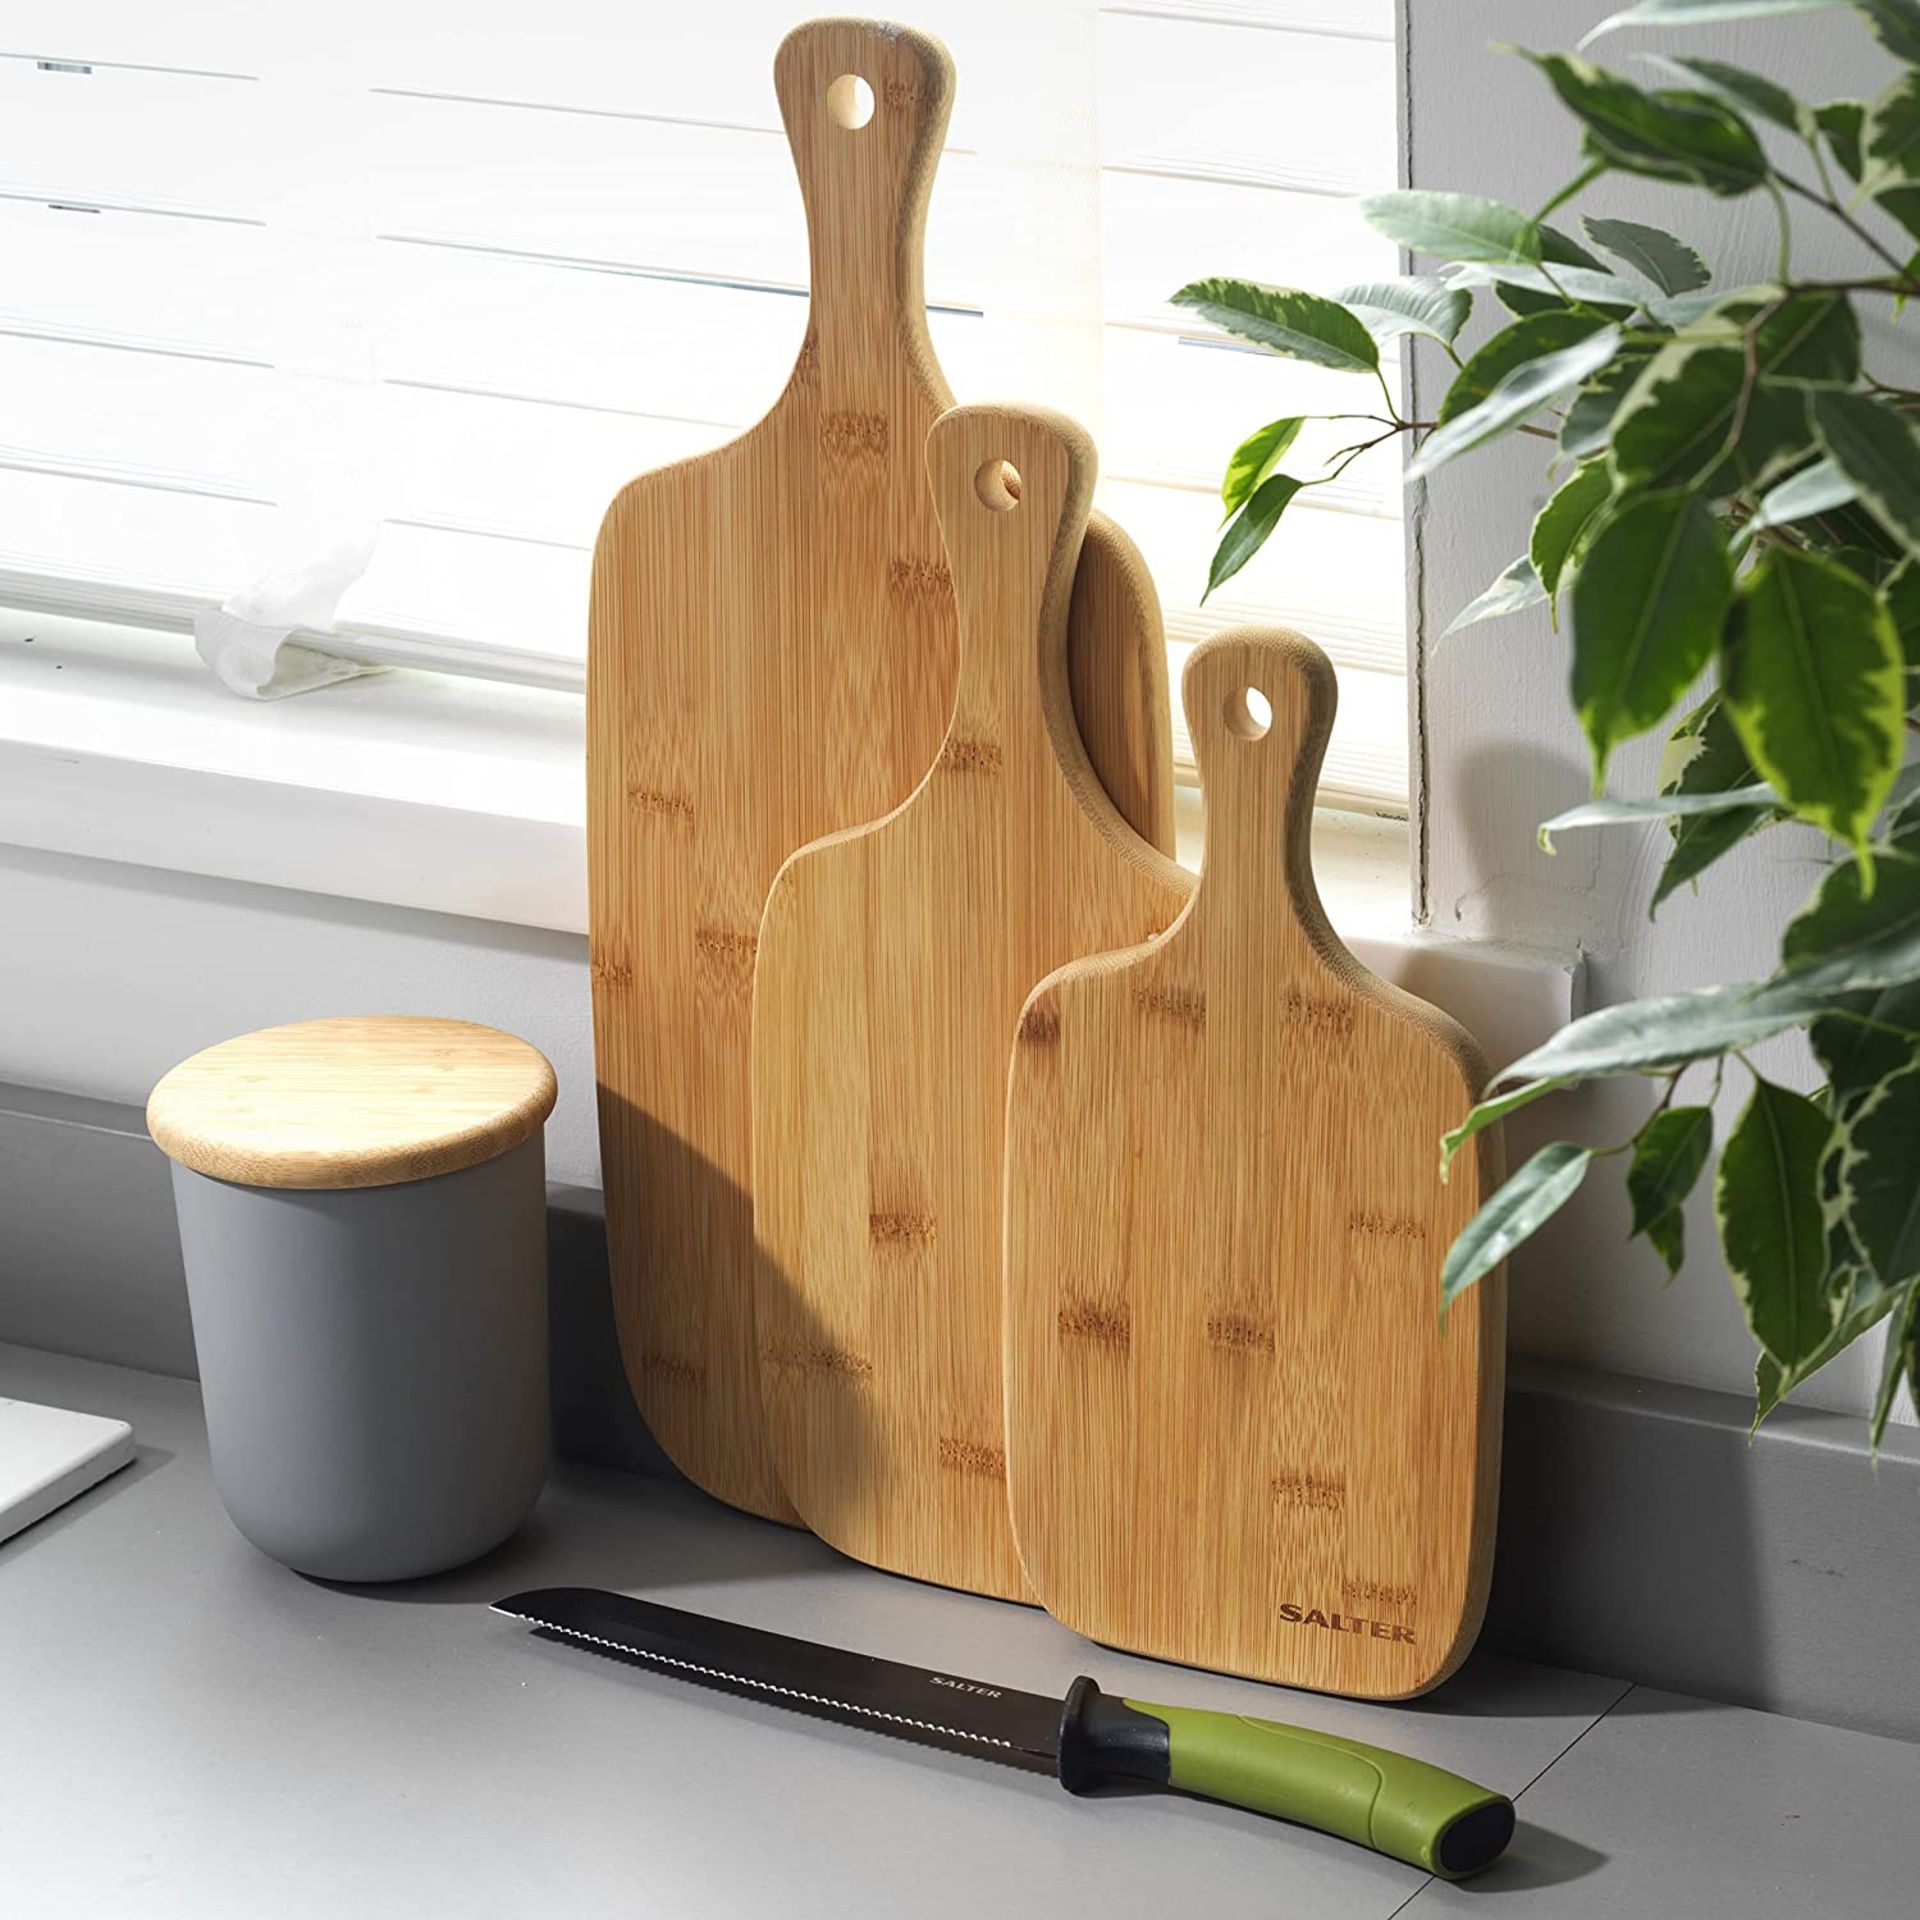 RRP - £17.99 Salter BW06732 Bamboo Paddle Chopping Set, 3 Piece Boards, 30/35/45